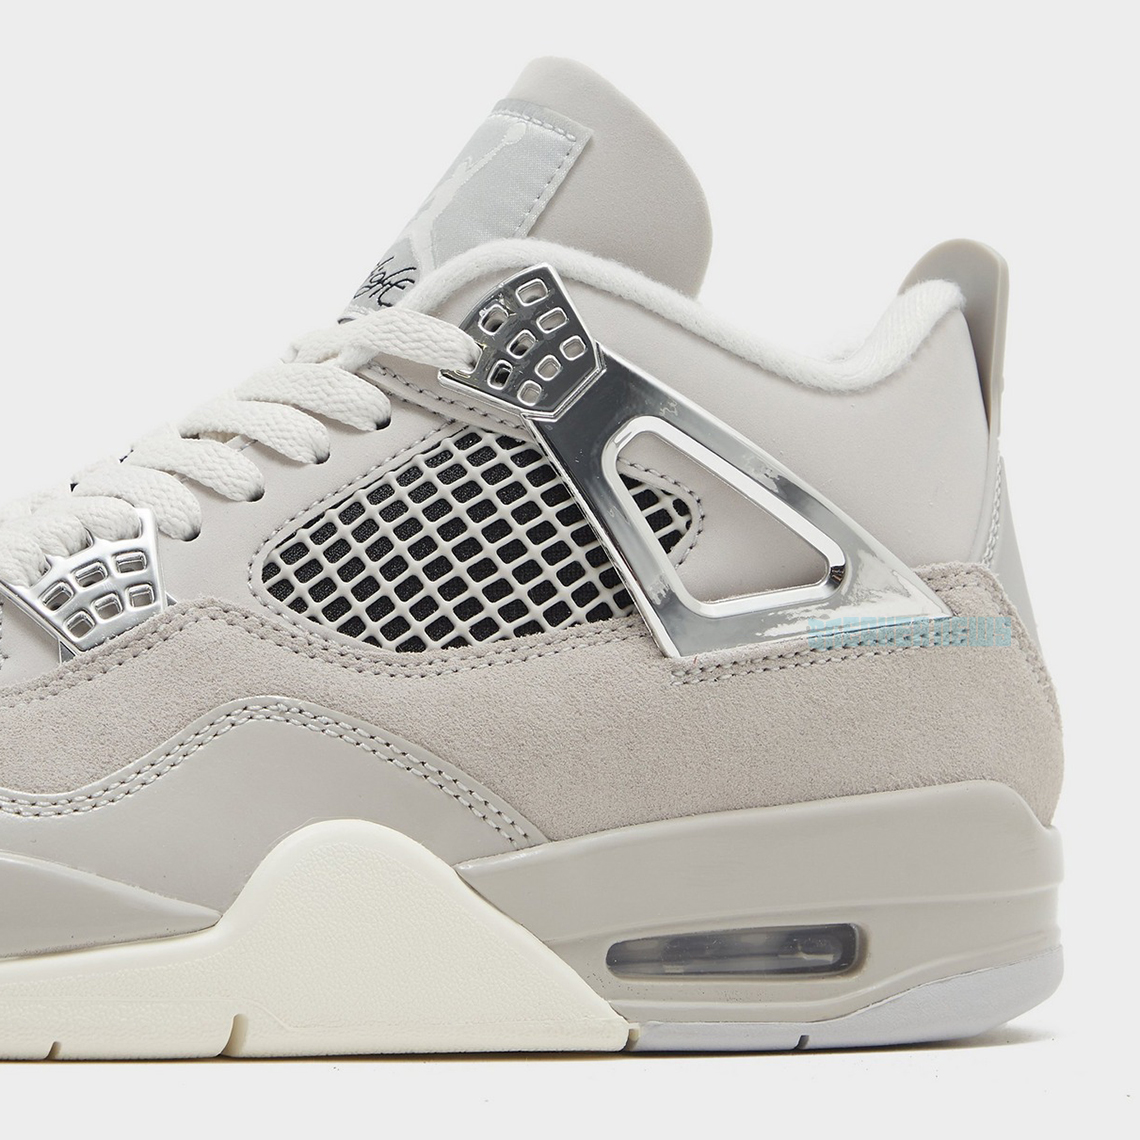 The Air Jordan 4 'Frozen Moments' Is a Must (Providing You Have Small Feet)